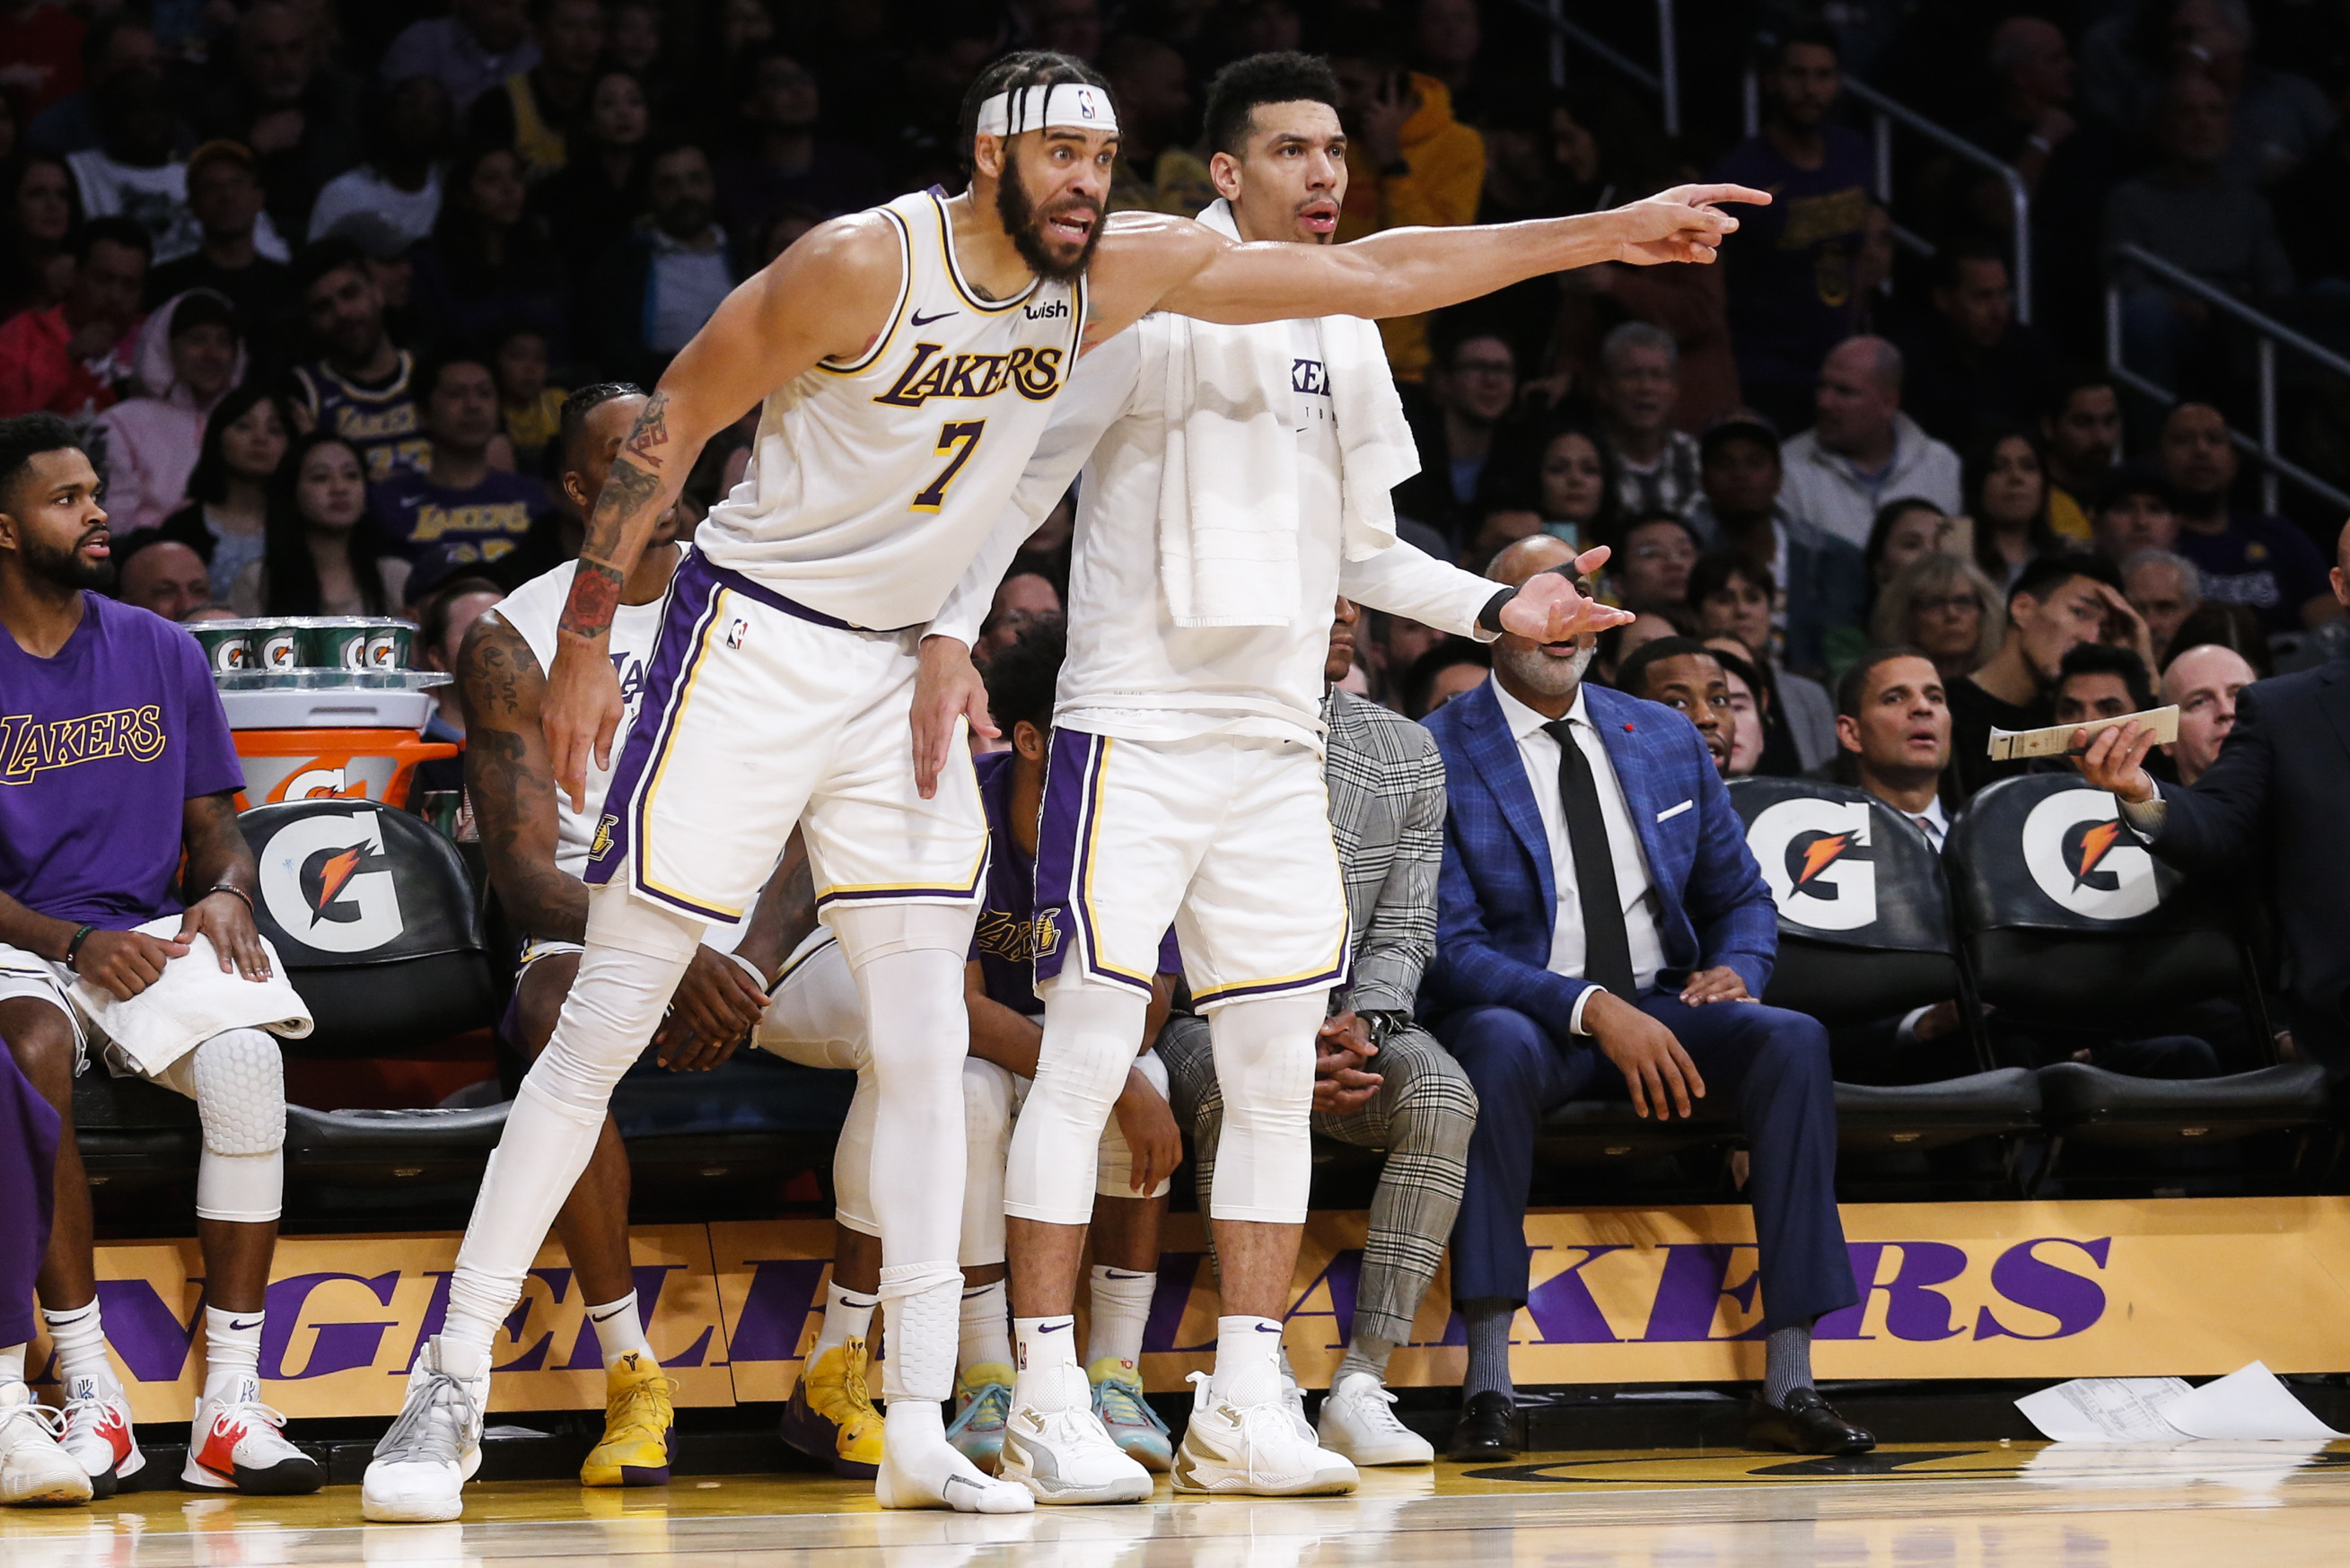 NBA bubble life: Lakers' JaVale McGee vlogs to document new reality